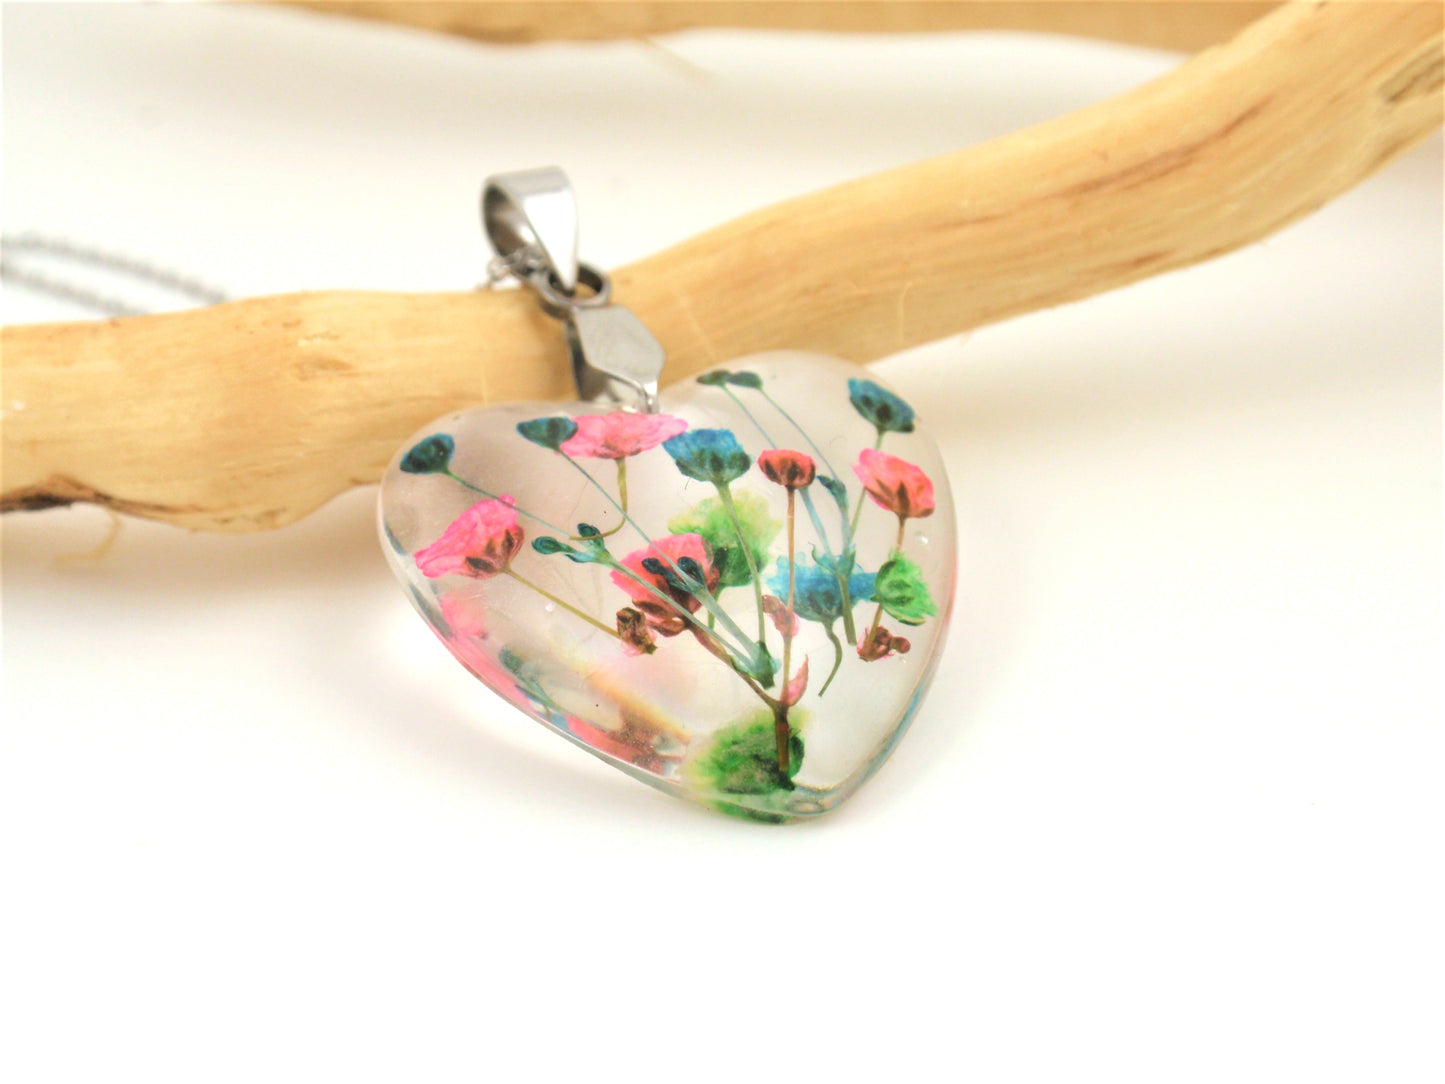 Real Flower Heart shape Necklace, Blue and pink flower resin jewelry